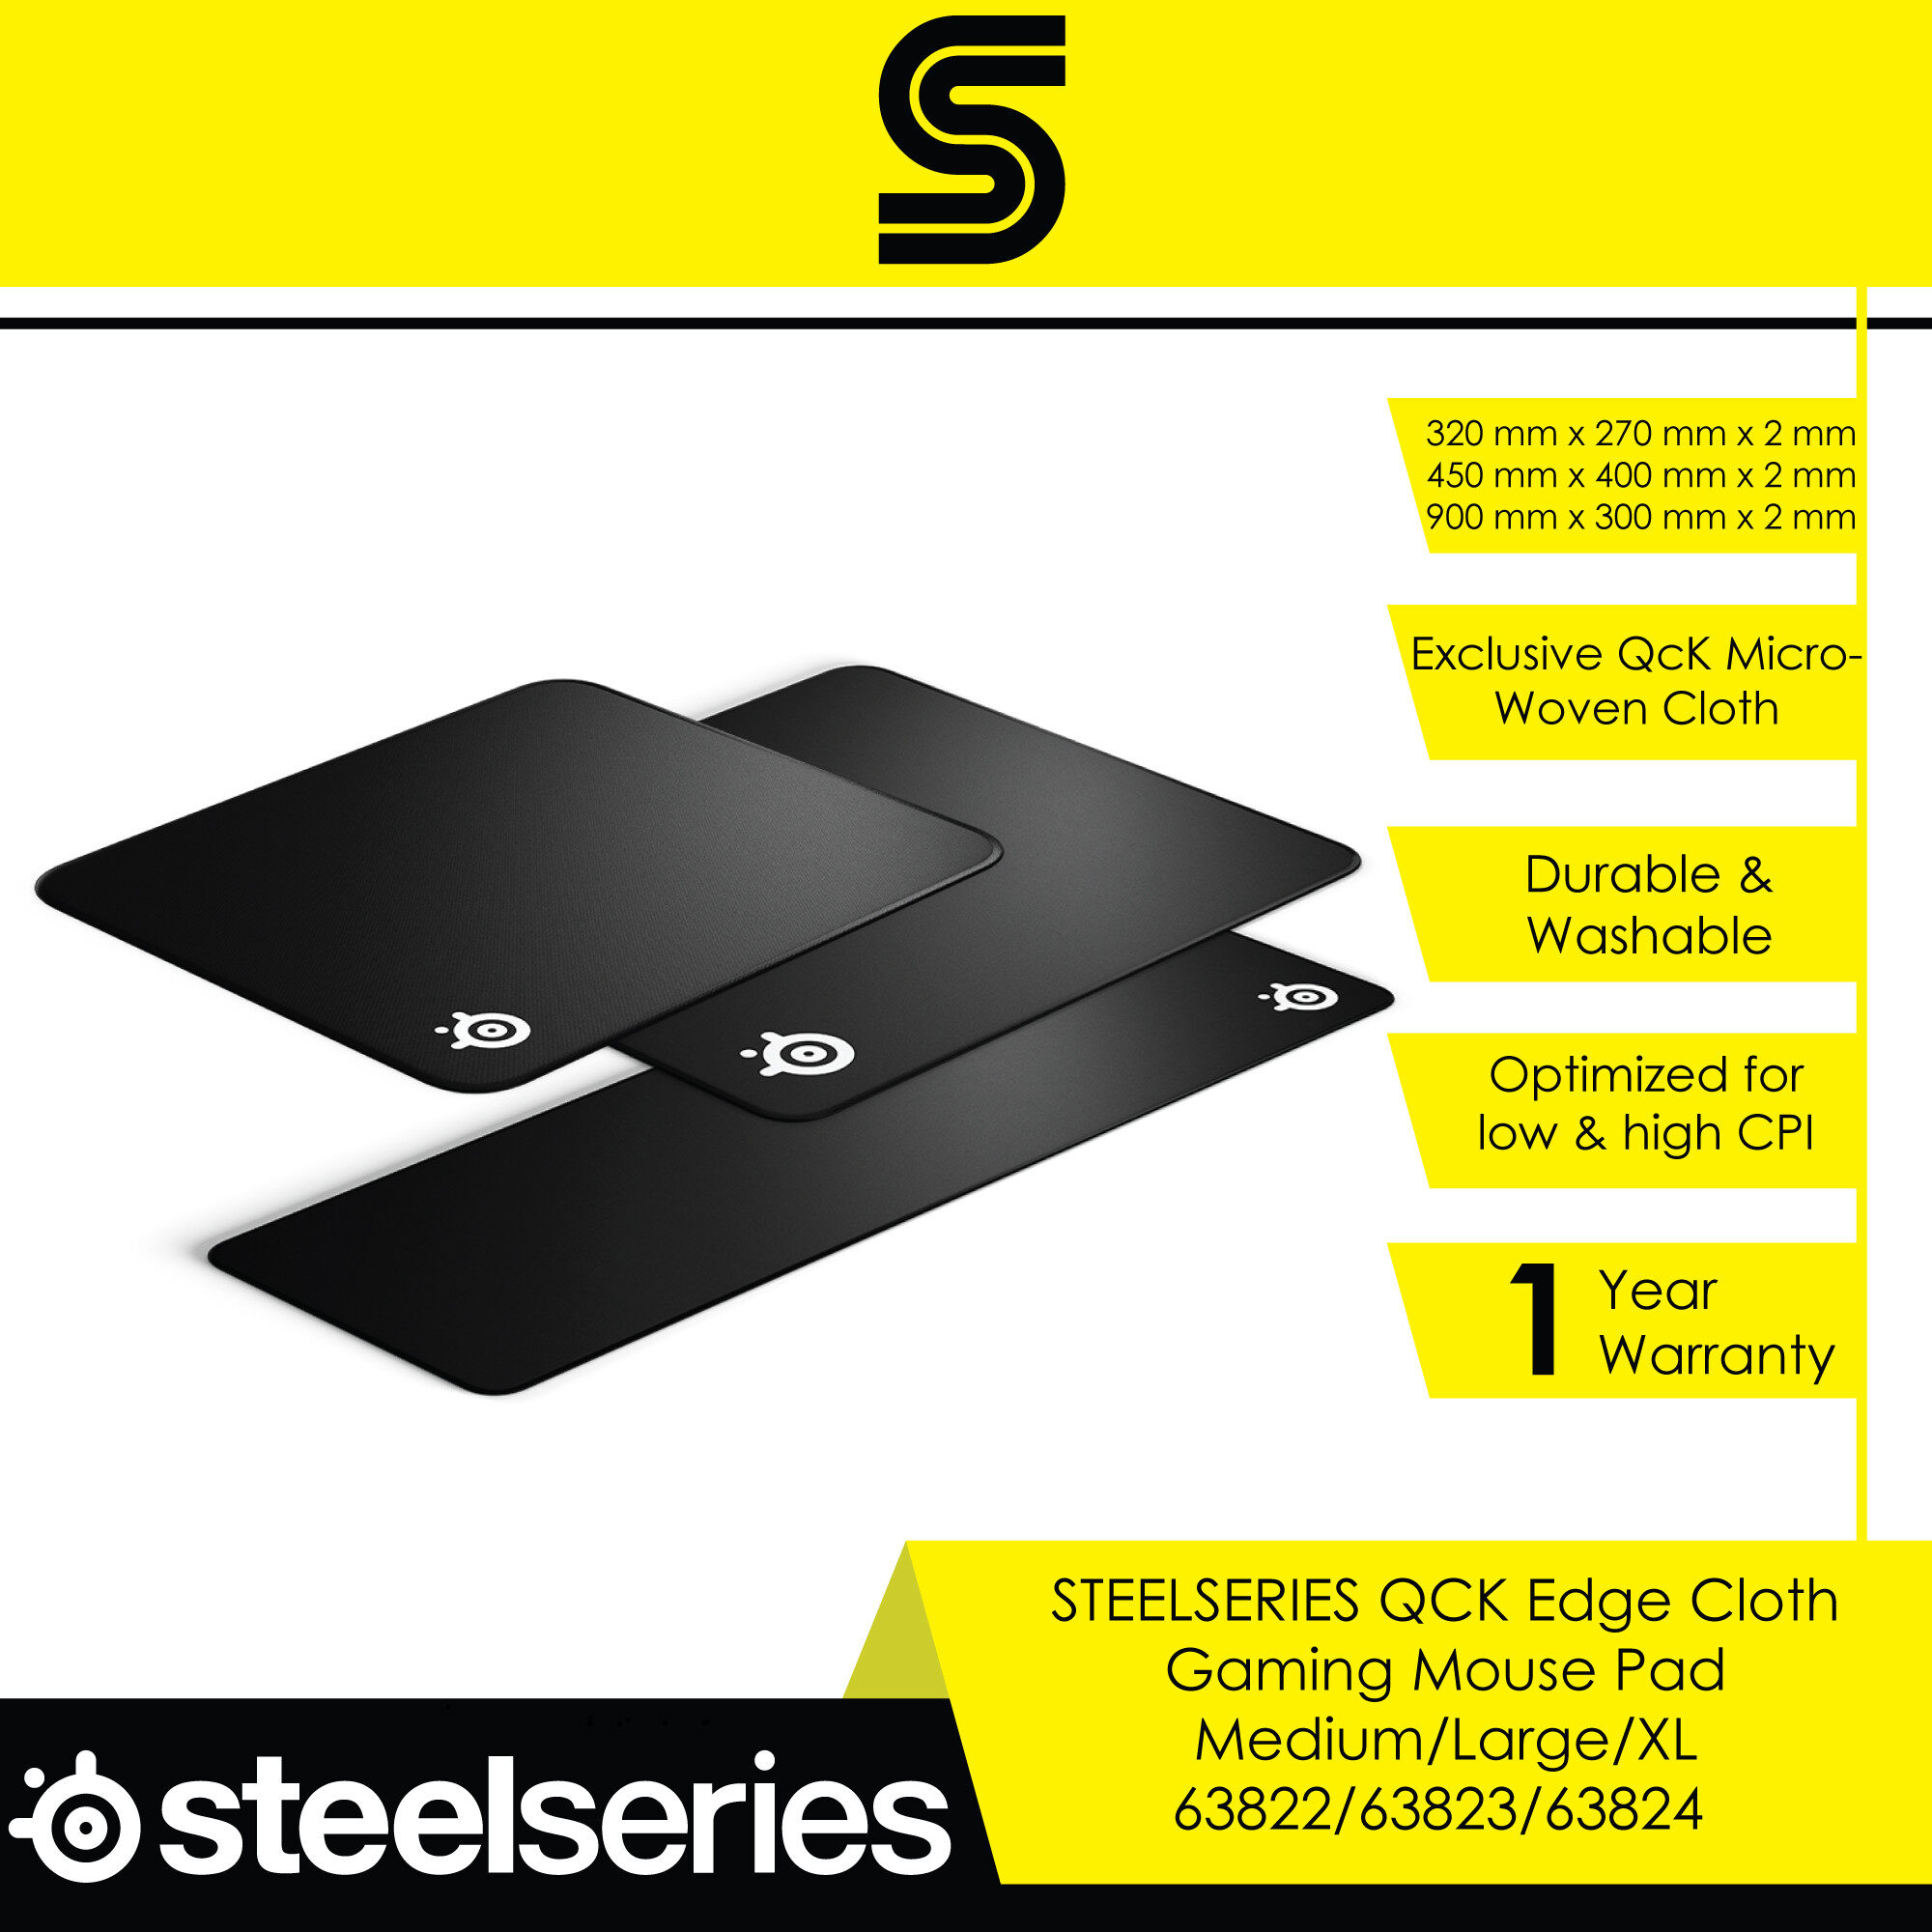 Steelseries QCK Edge Cloth Gaming Mouse Pad - Medium/Large/XL - 63822/63823/63824